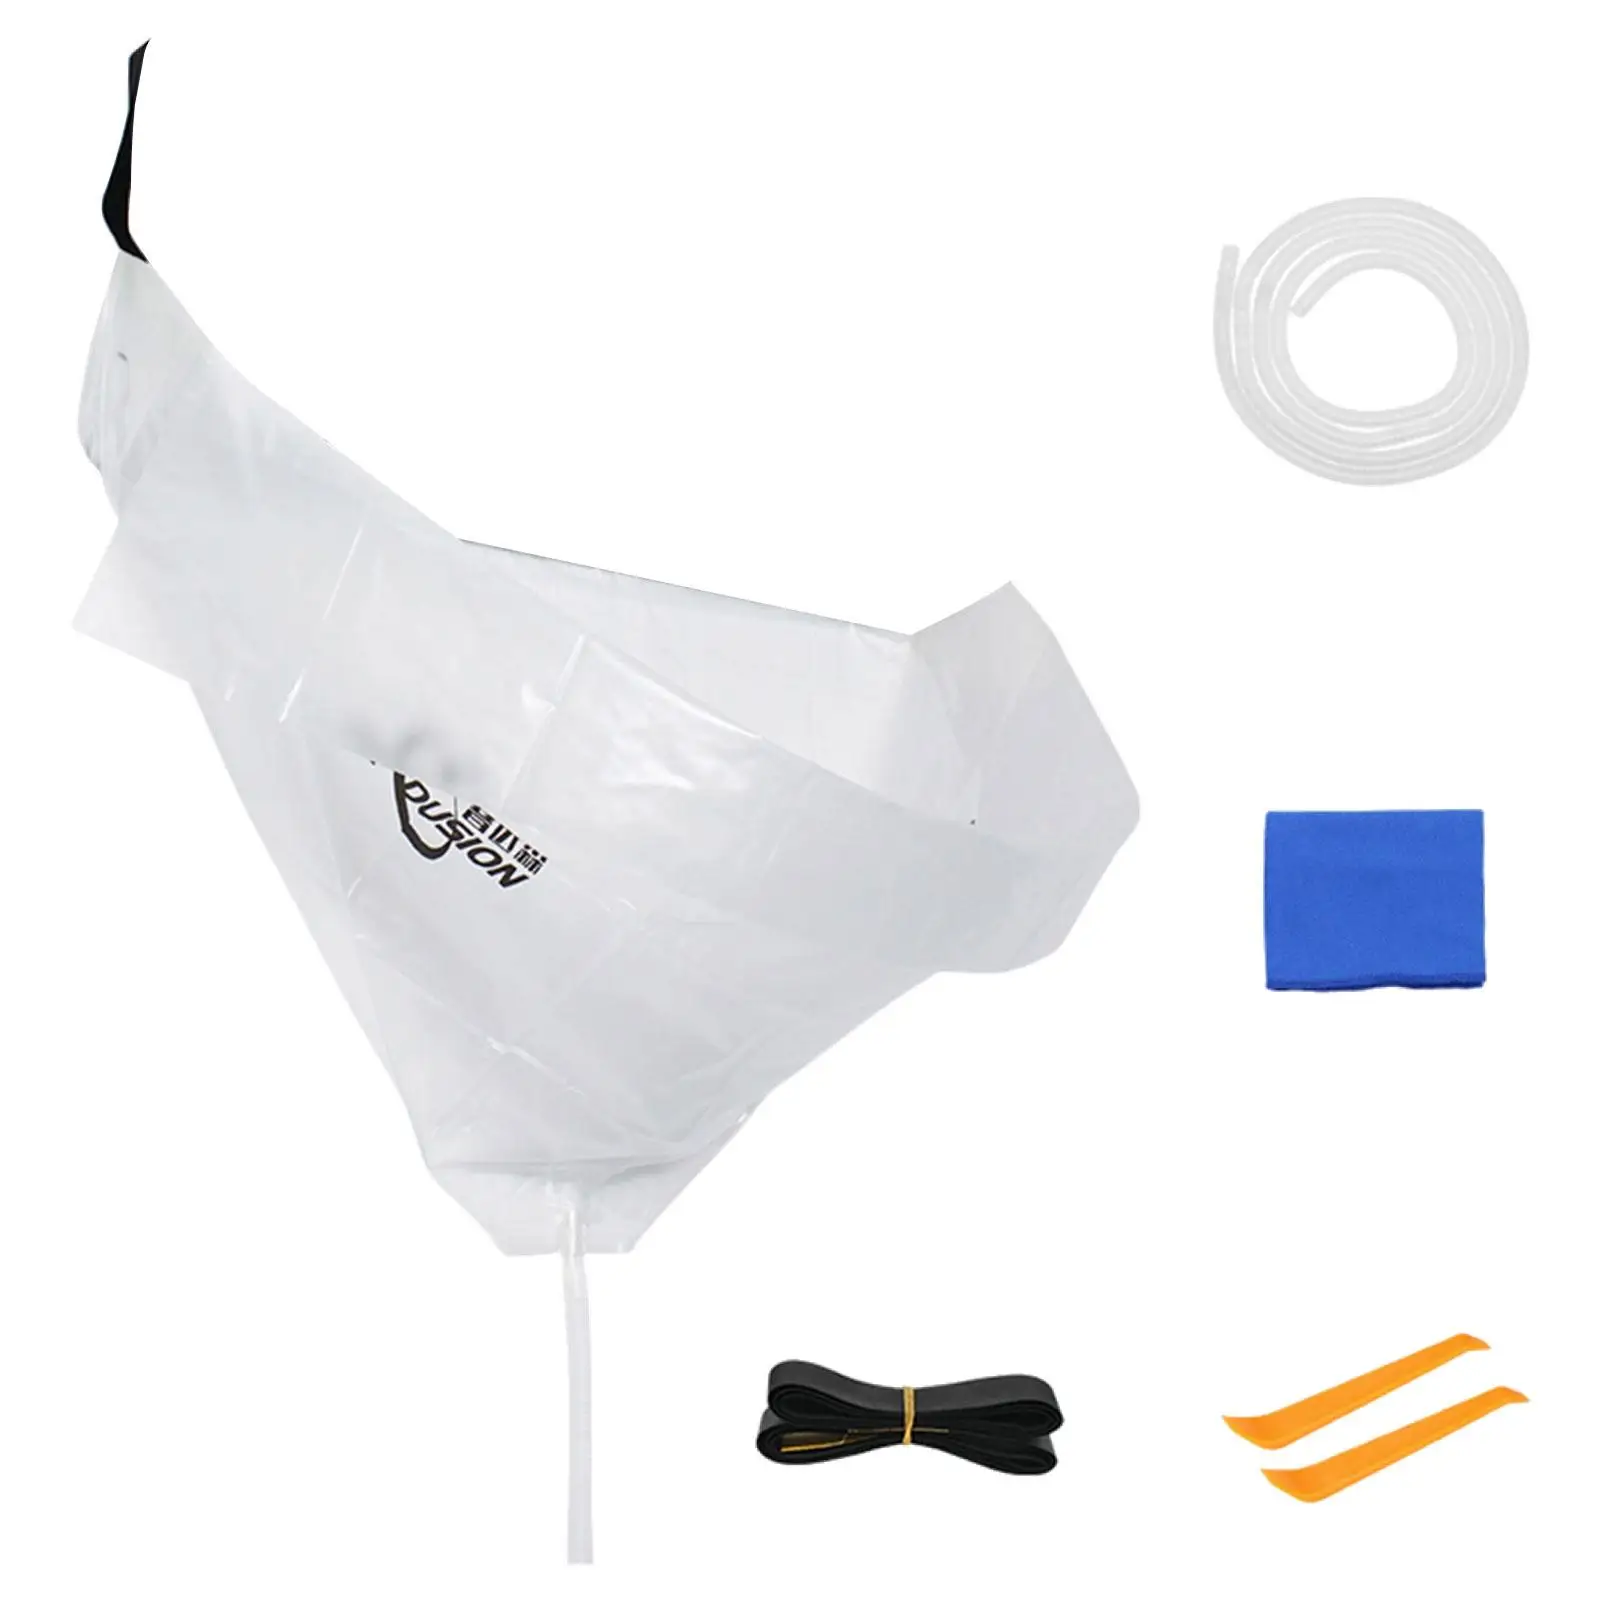 Air Conditioning Cleaning Cover Bag for Wall Mounted Units Waterproof Leakproof Air Conditioning Service Bag for Office